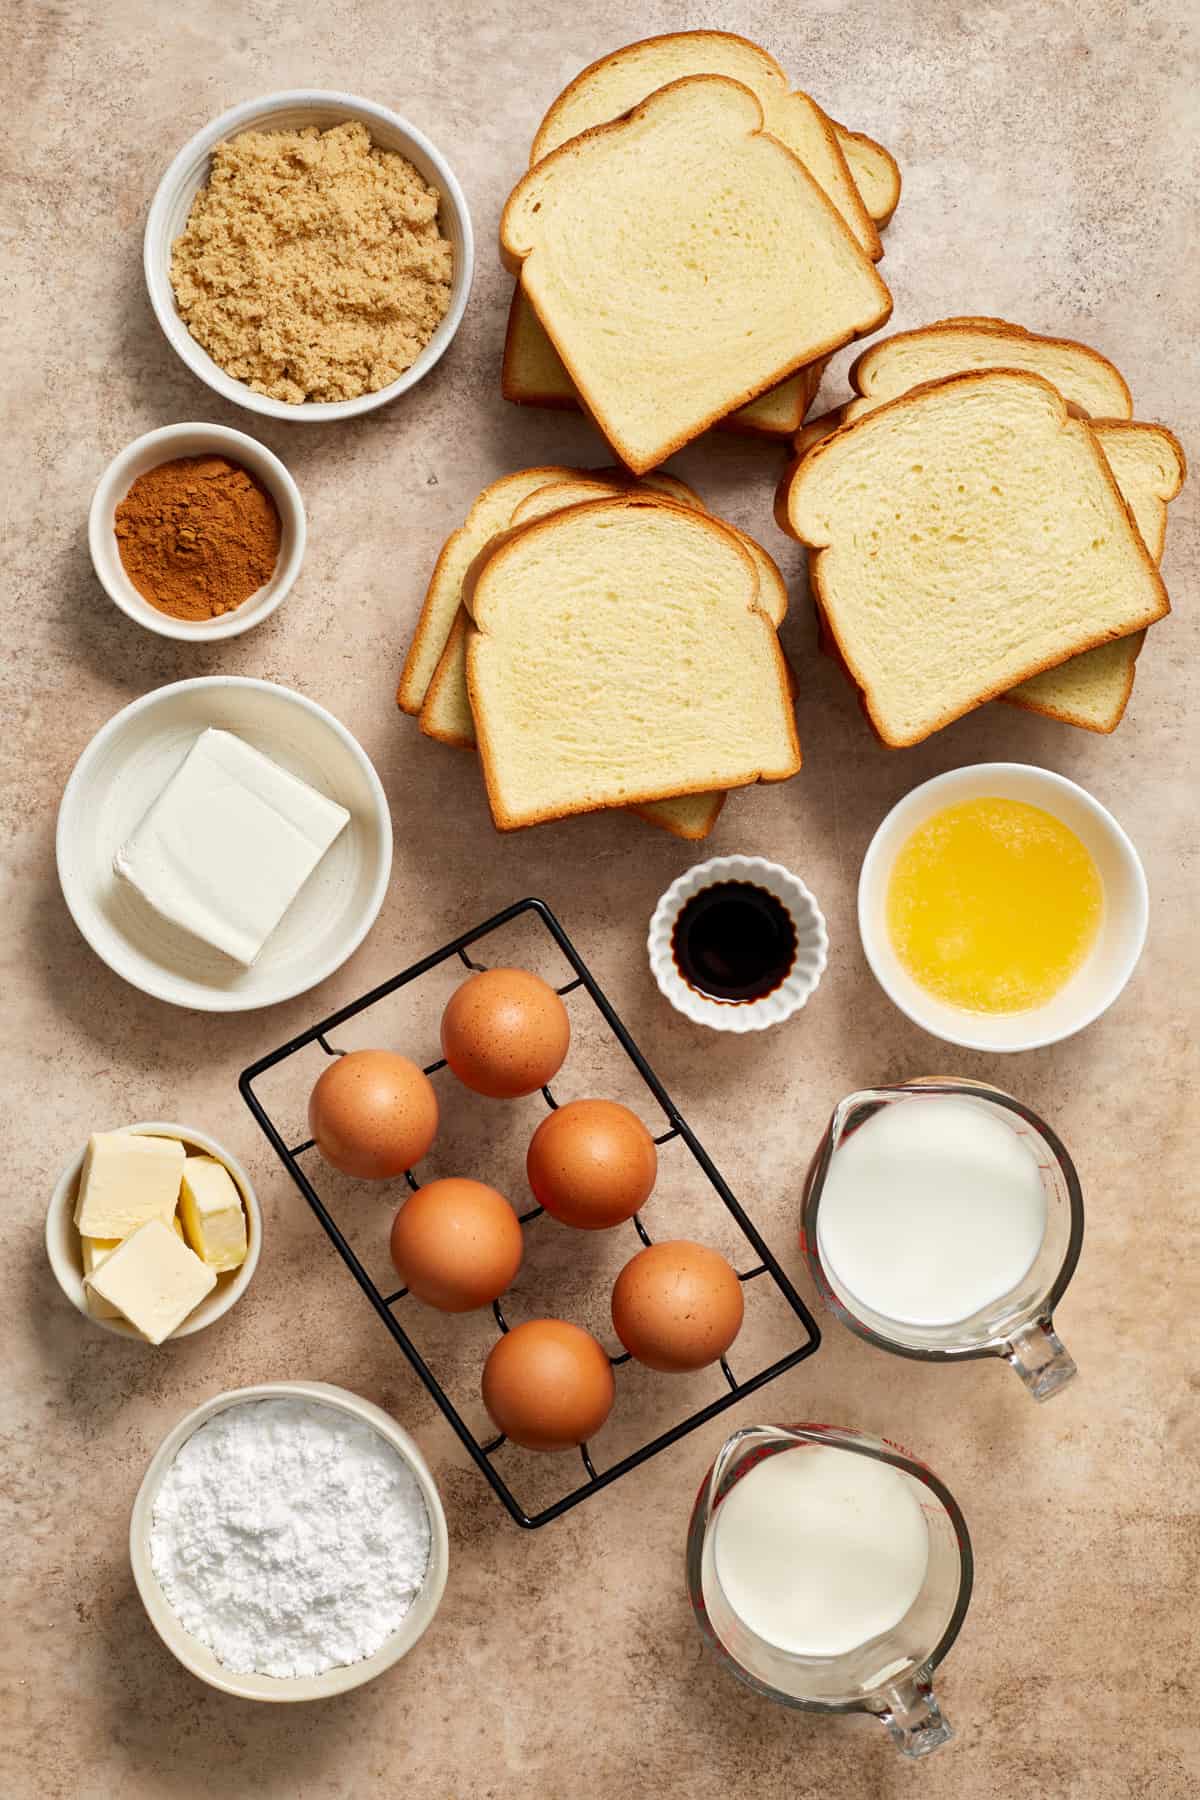 Eggs, milk, cream, butter, Brioche bread and other ingredients arranged on surface.